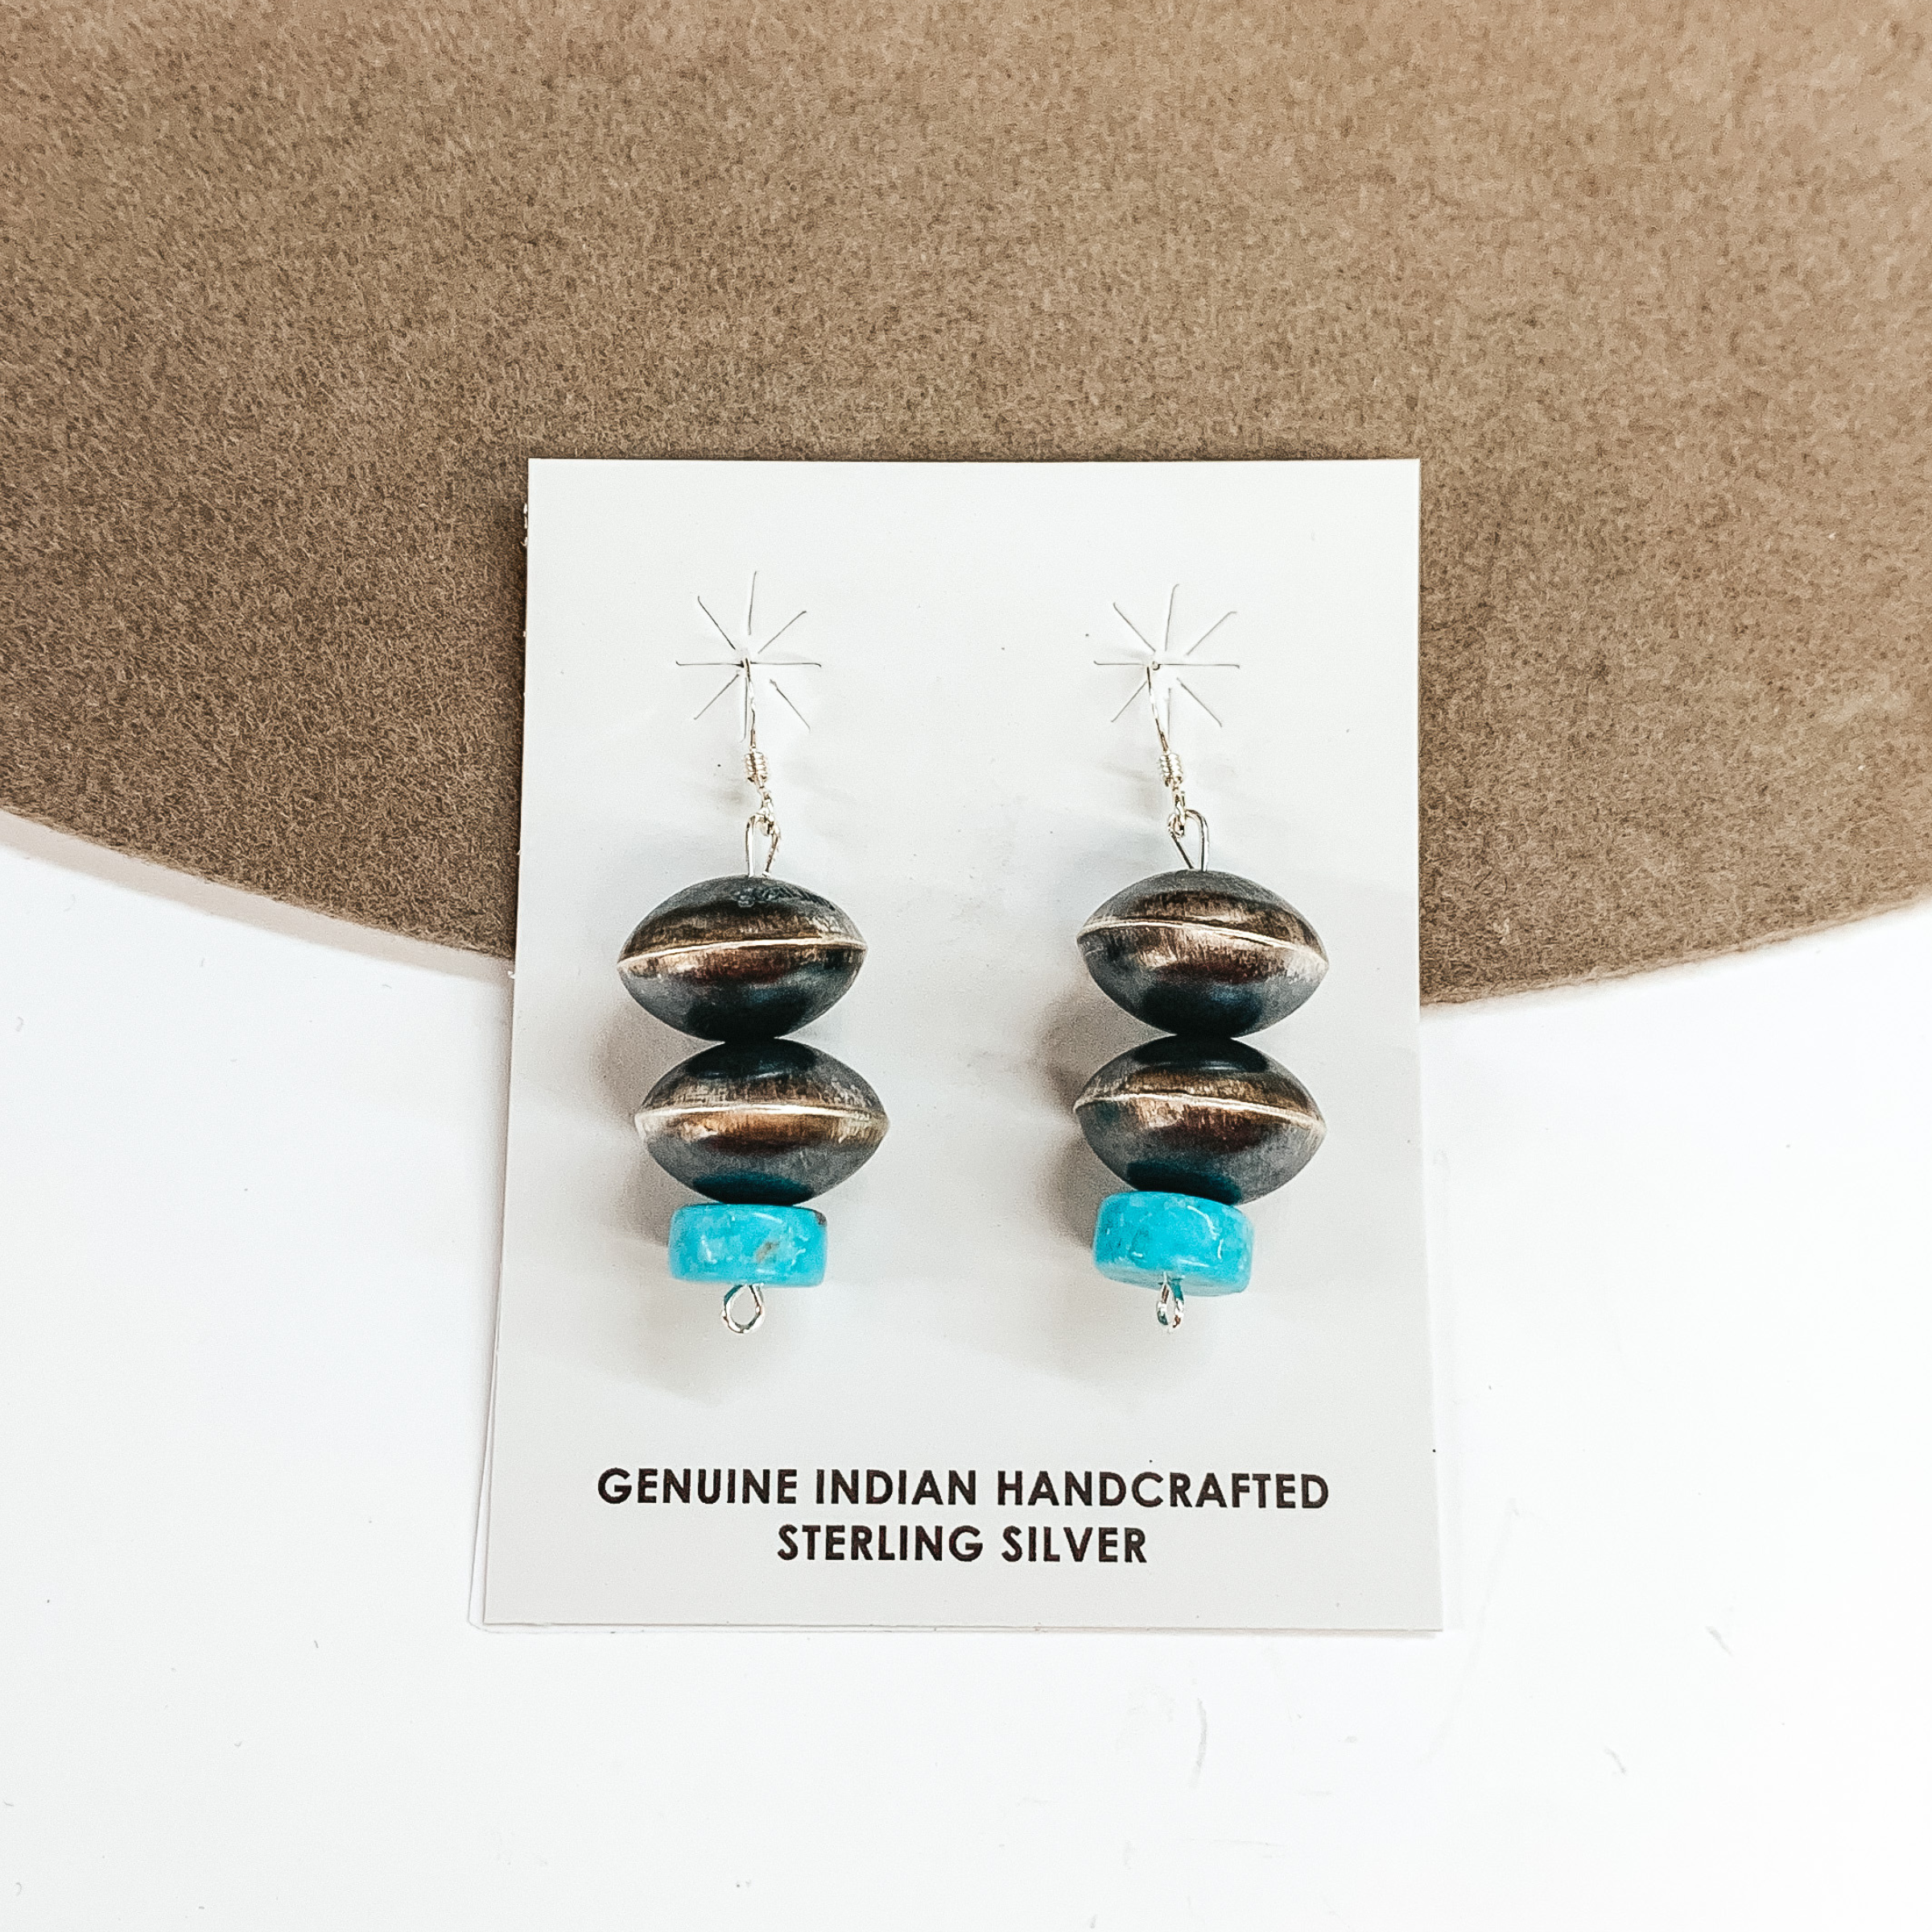 The earrings pictured include fish hook earrings with a two saucer pearl drop and a turquoise stone at the bottom. These earrings are pictured on a tan and white background. 